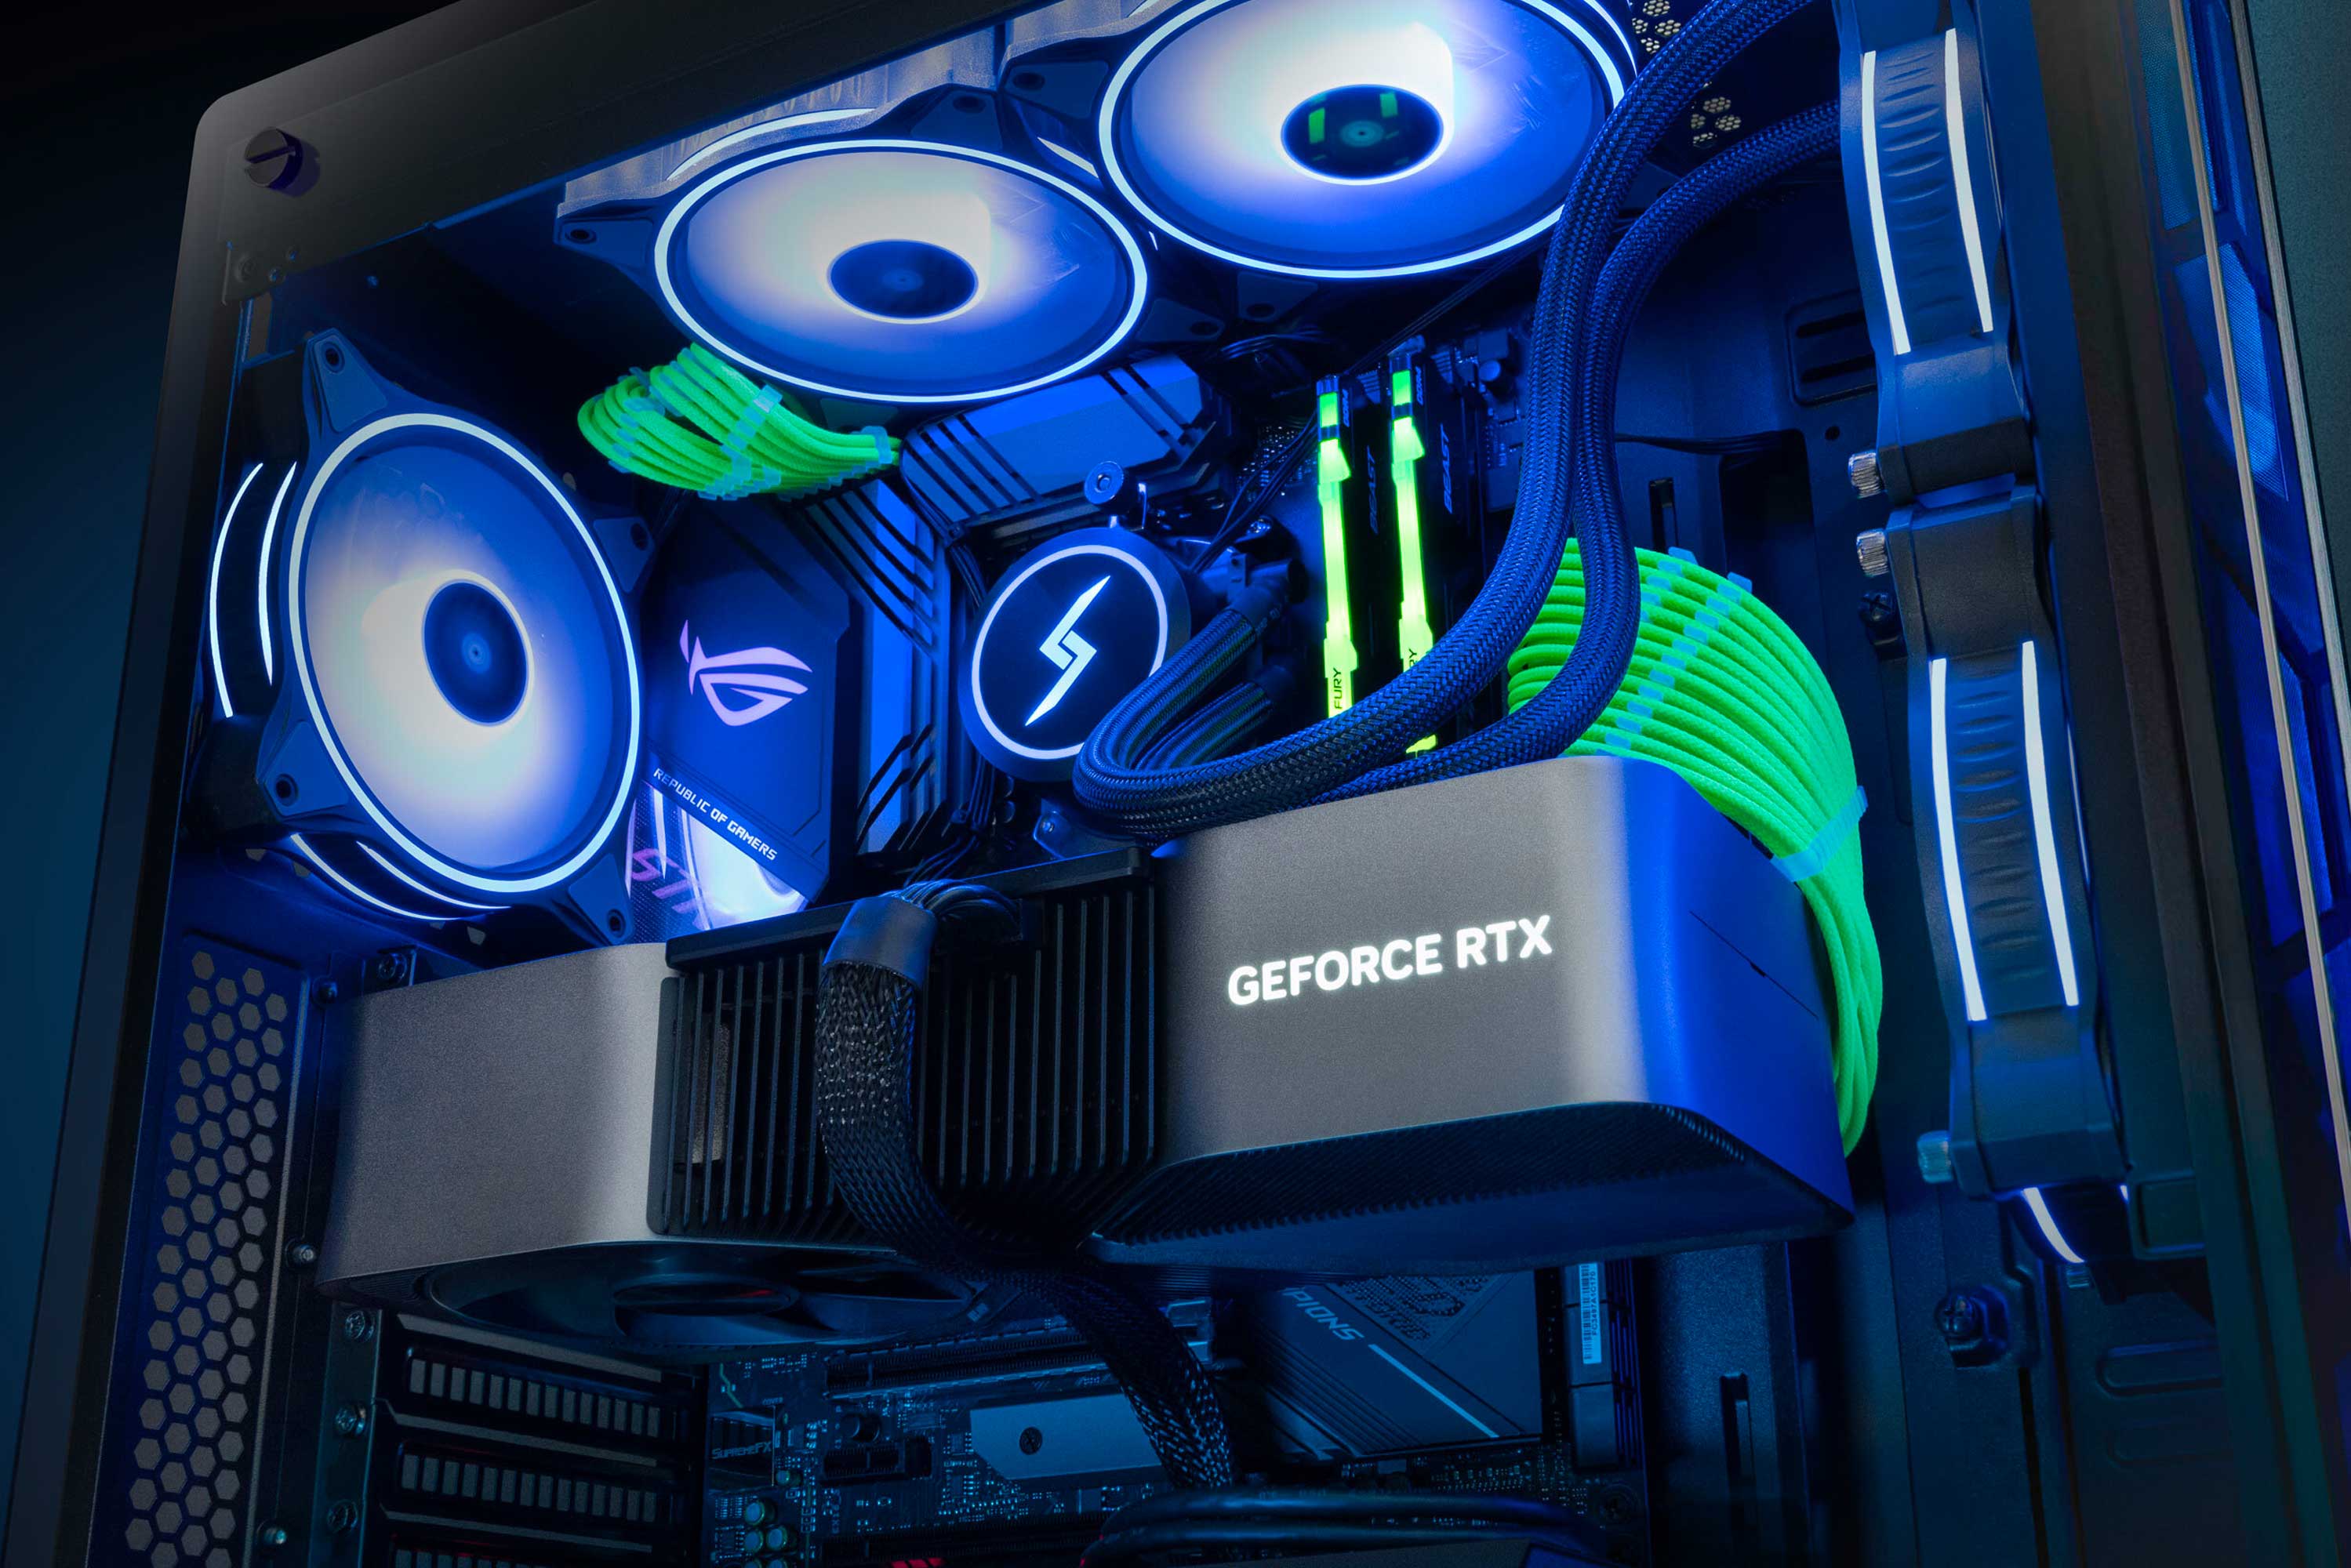 Blue lighting Lumos desktop interior with two GeForce RTX graphic cards